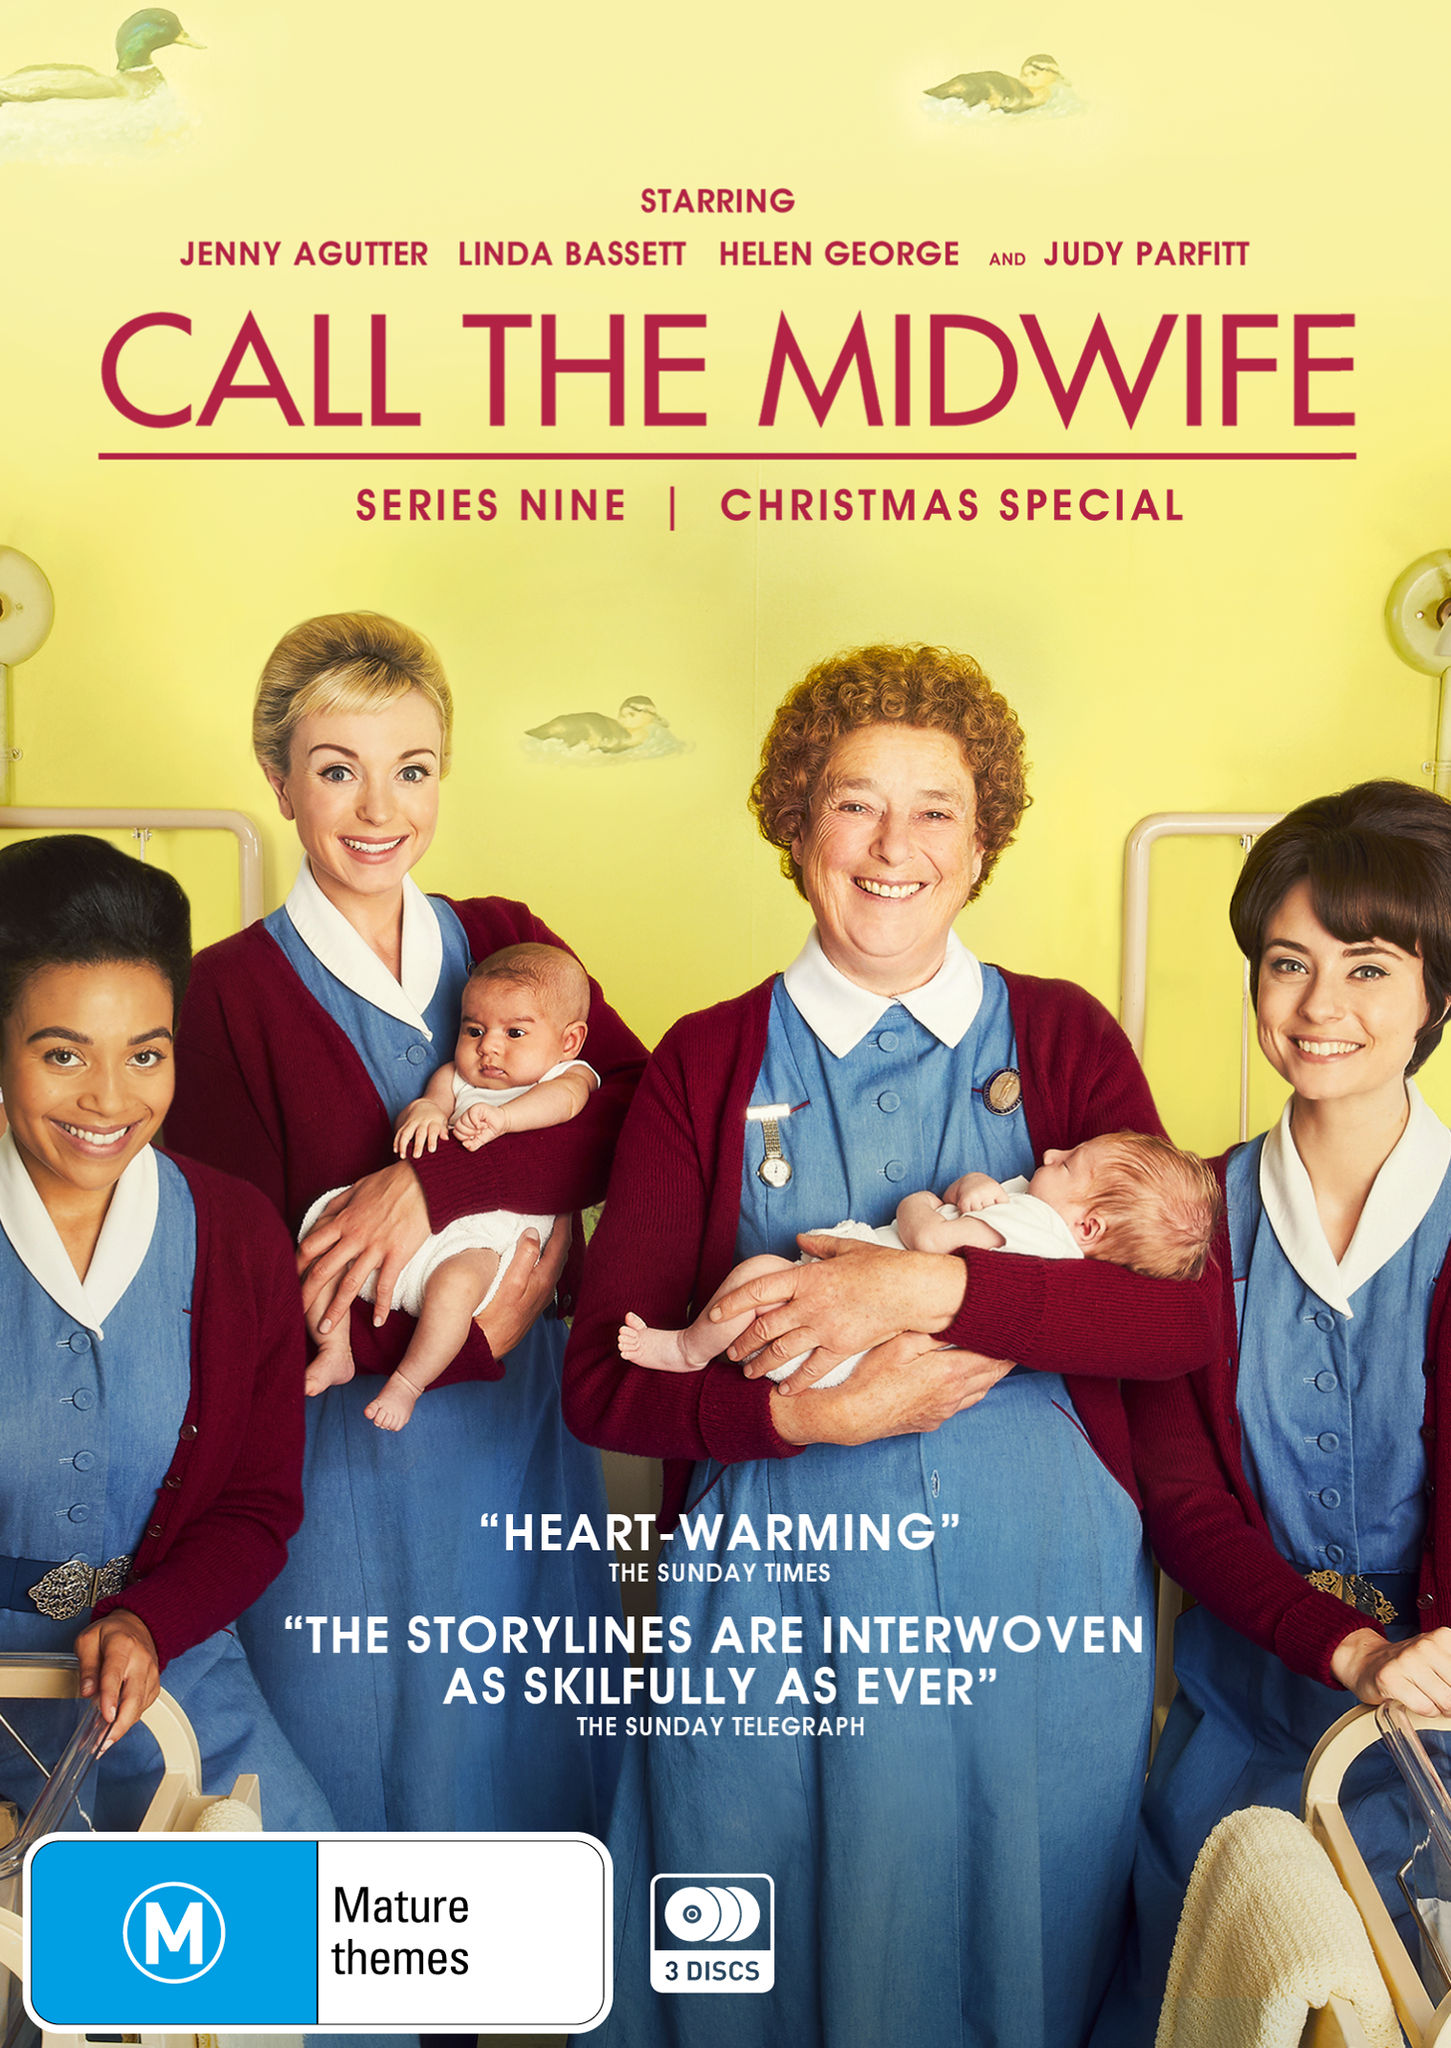 CALL THE MIDWIFE SERIES 9